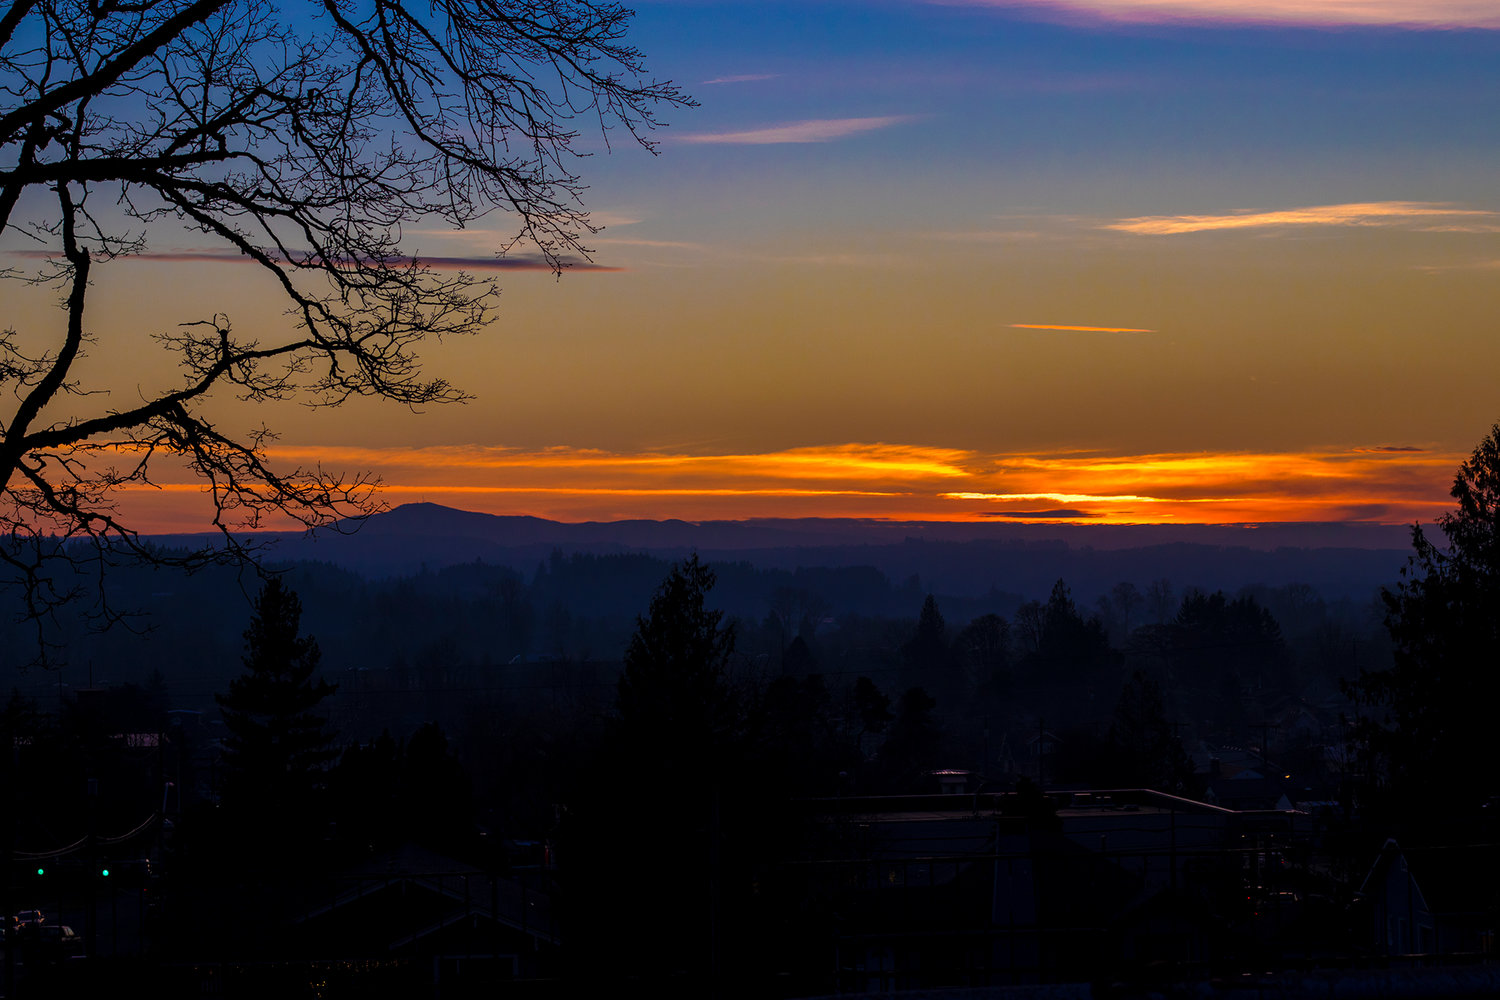 A sunset is seen over the Willapa Hills from Chehalis.